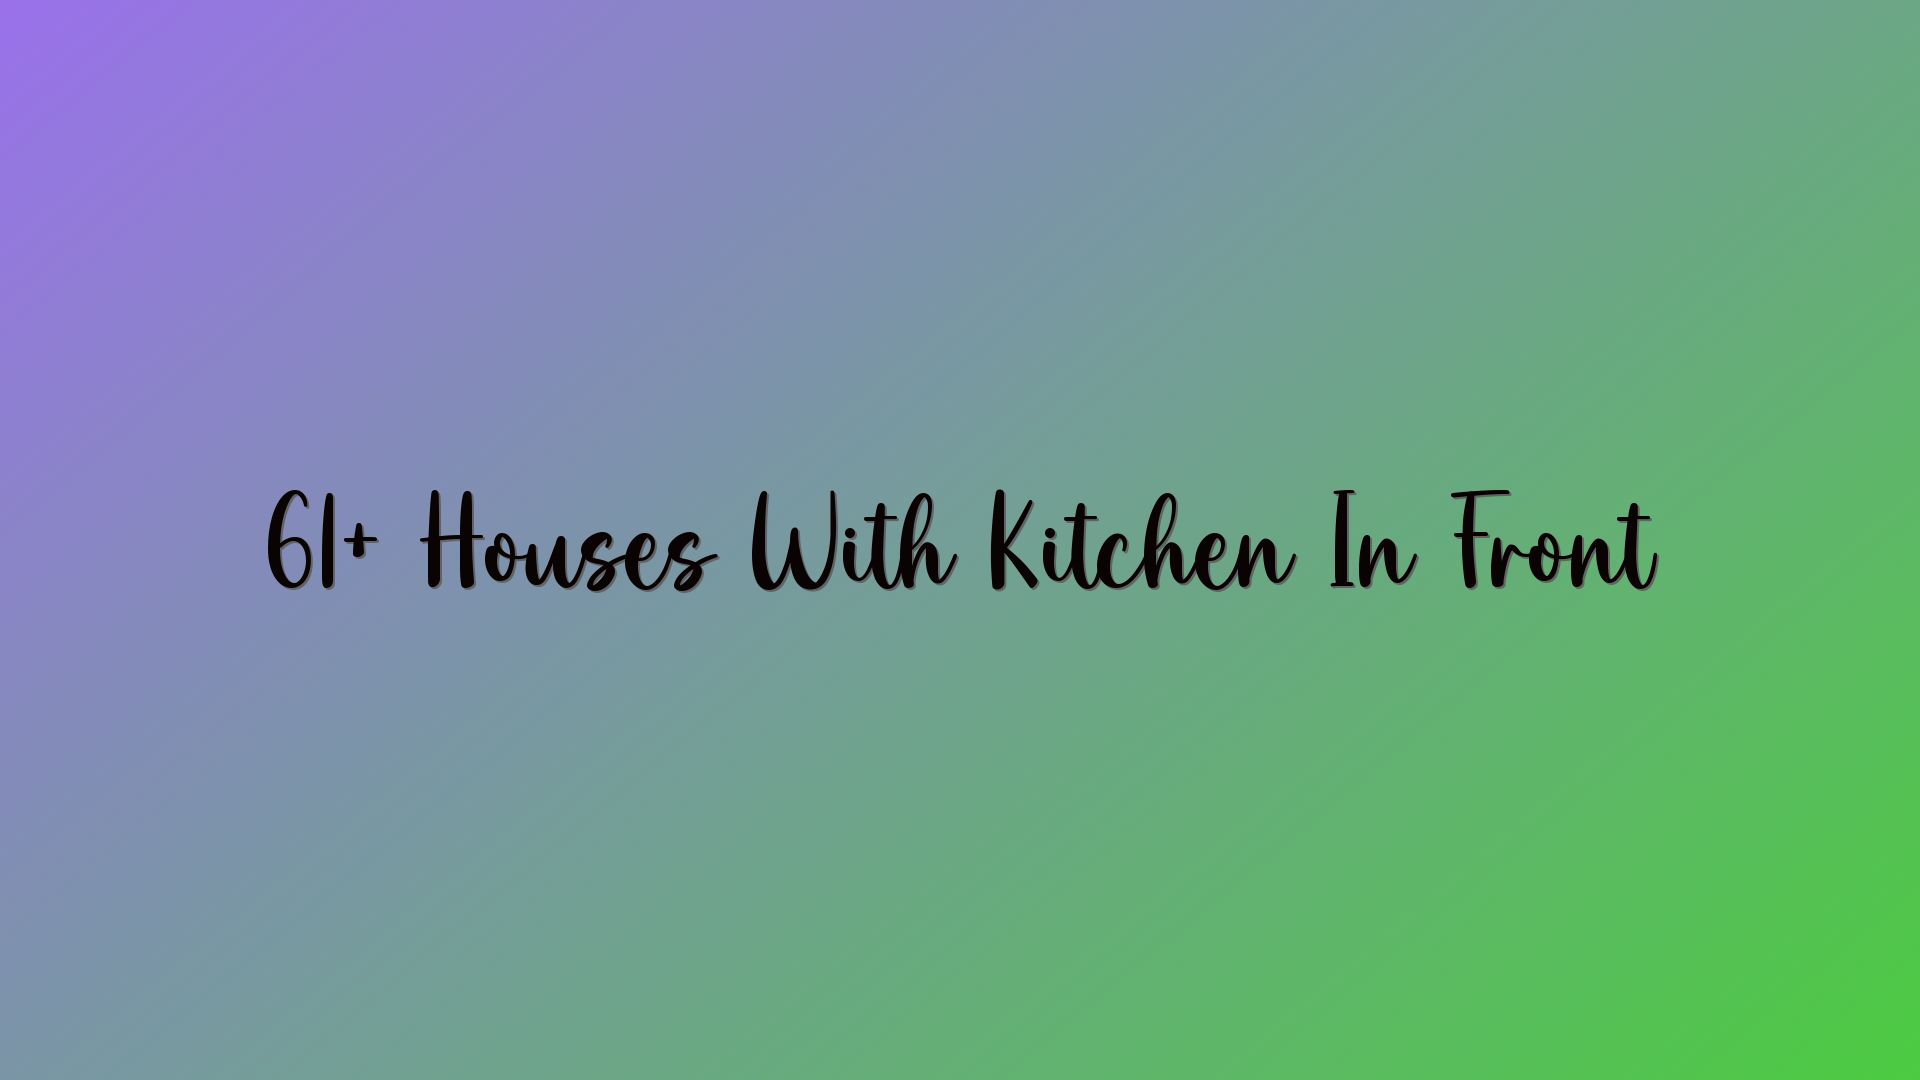 61+ Houses With Kitchen In Front